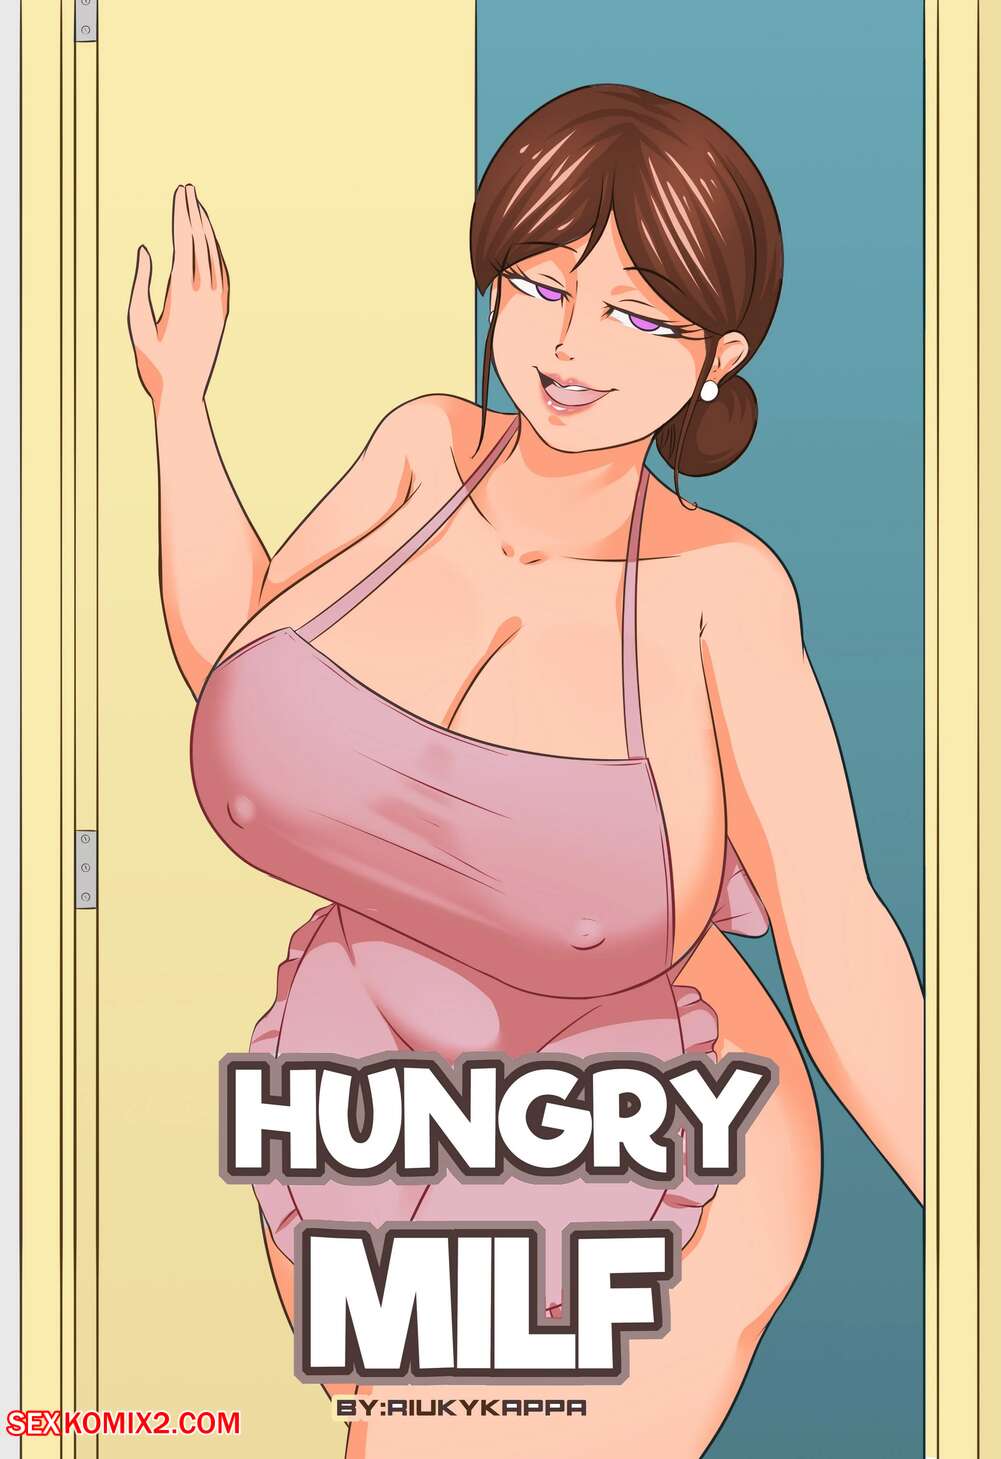 Porn comic Hungry Milf. Riukykappa Sex comic brunette MILF hasnt | Porn  comics in English for adults only | sexkomix2.com